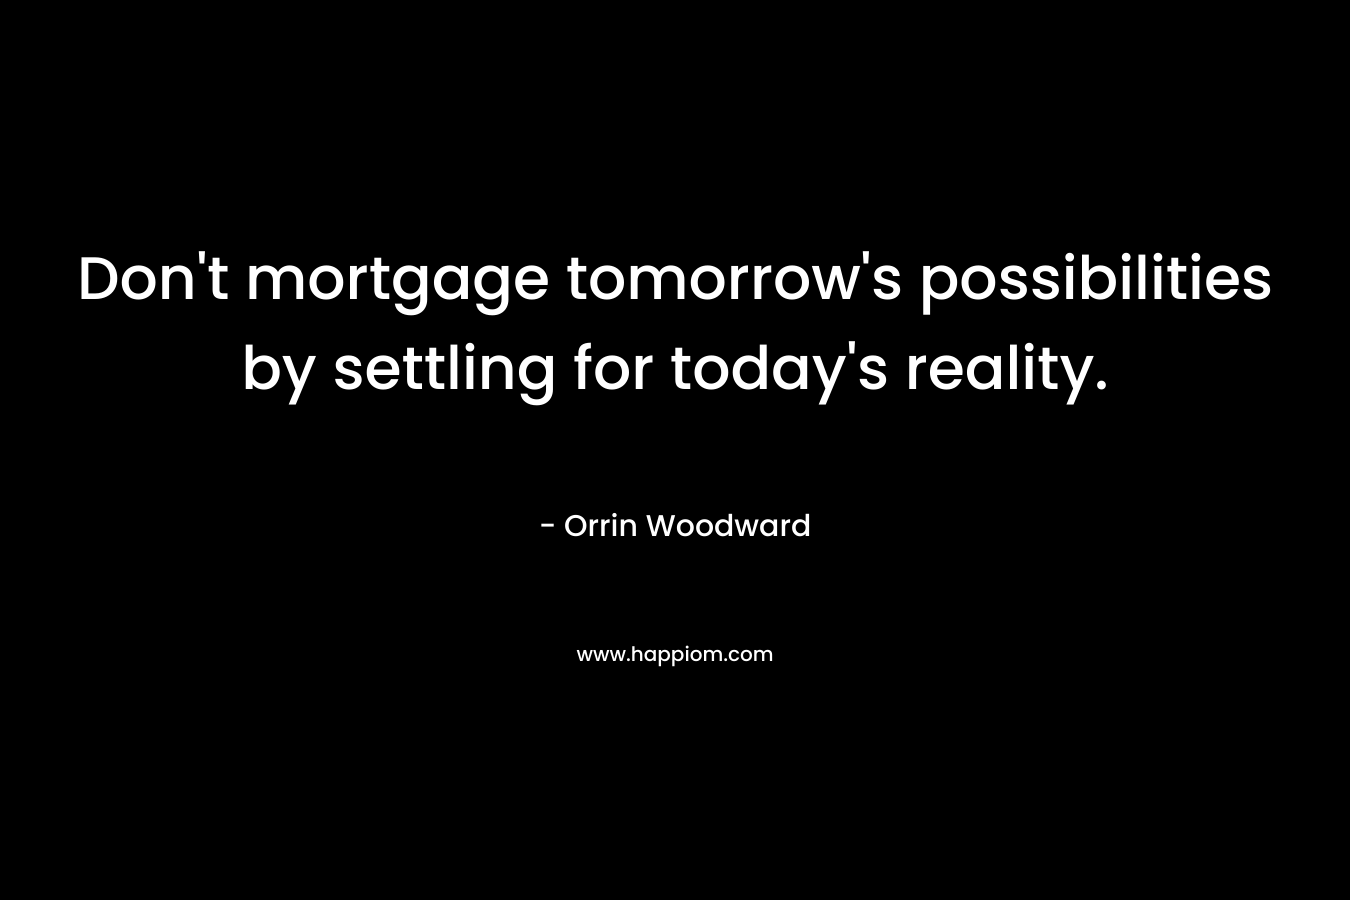 Don’t mortgage tomorrow’s possibilities by settling for today’s reality. – Orrin Woodward